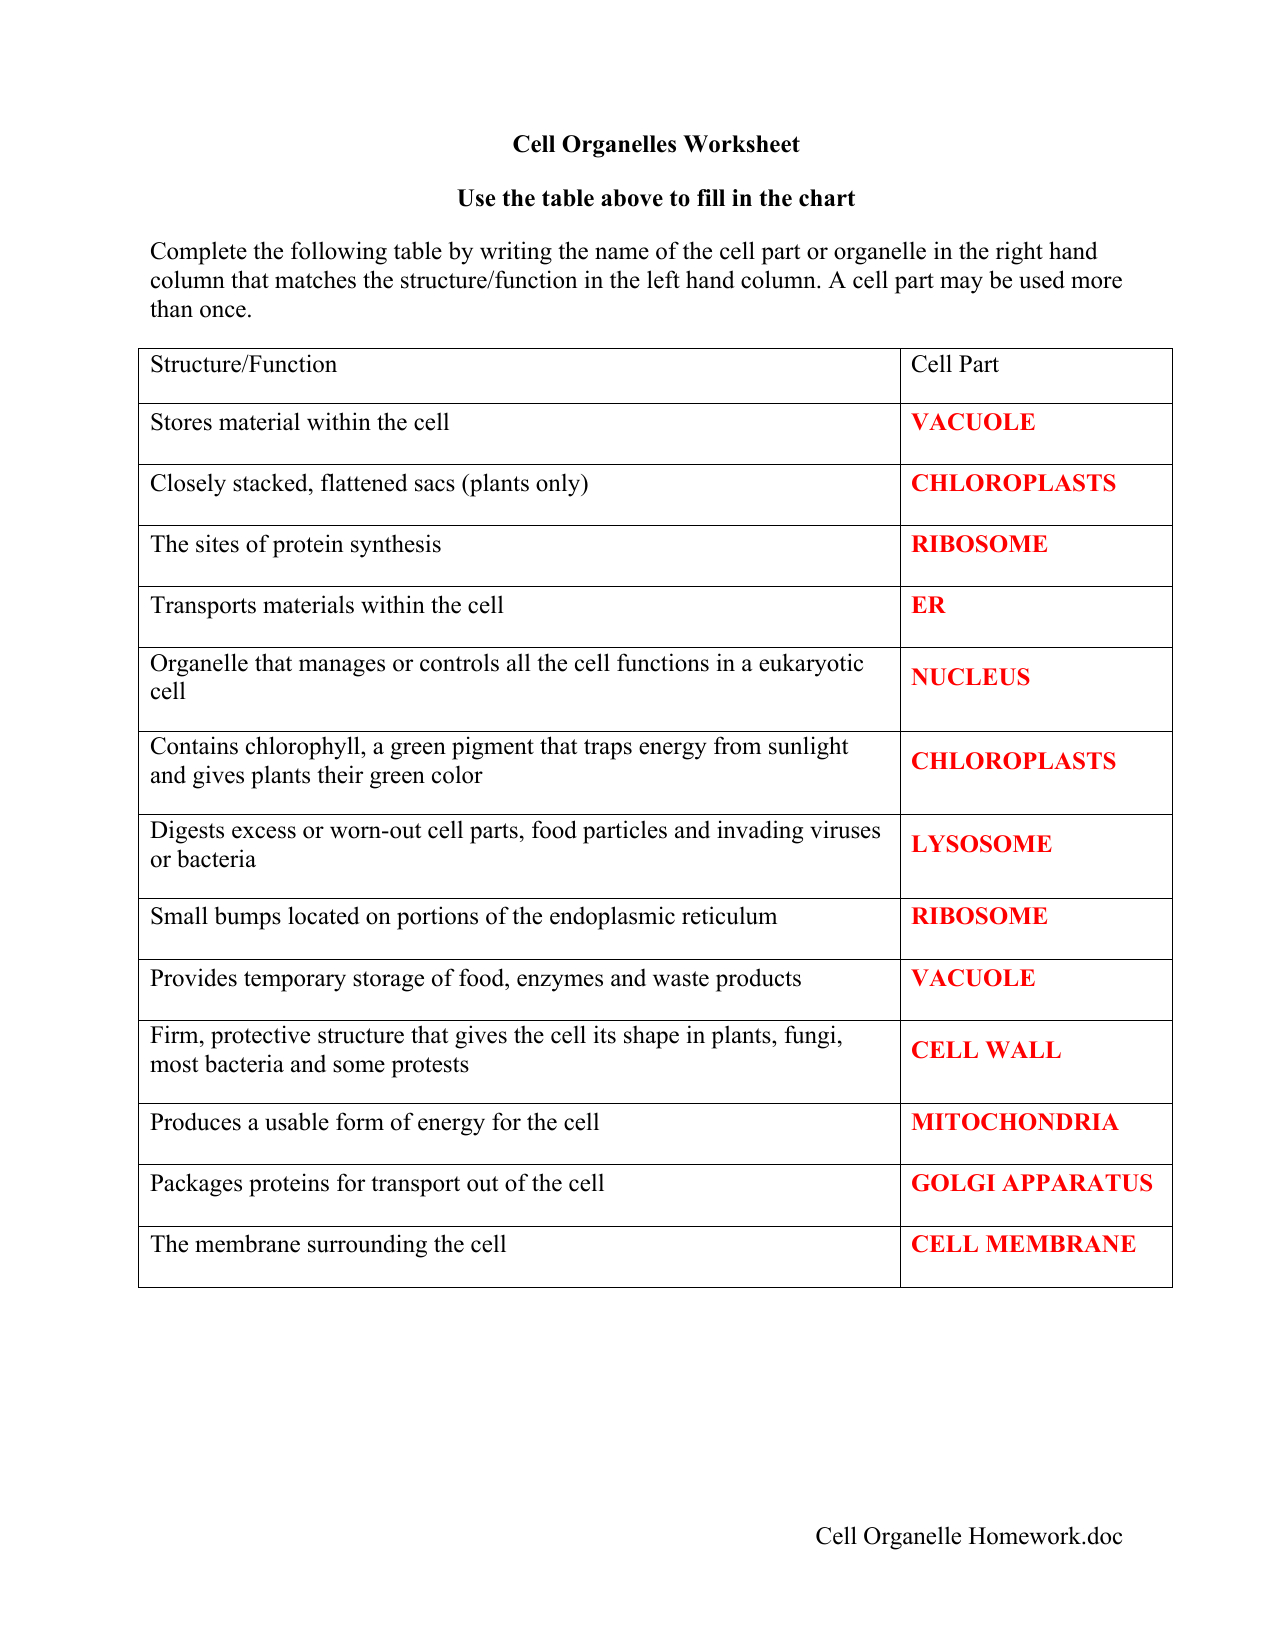 Cell Organelle Homeworkdoc Cell Organelles Worksheet Regarding Cells And Organelles Worksheet Answers